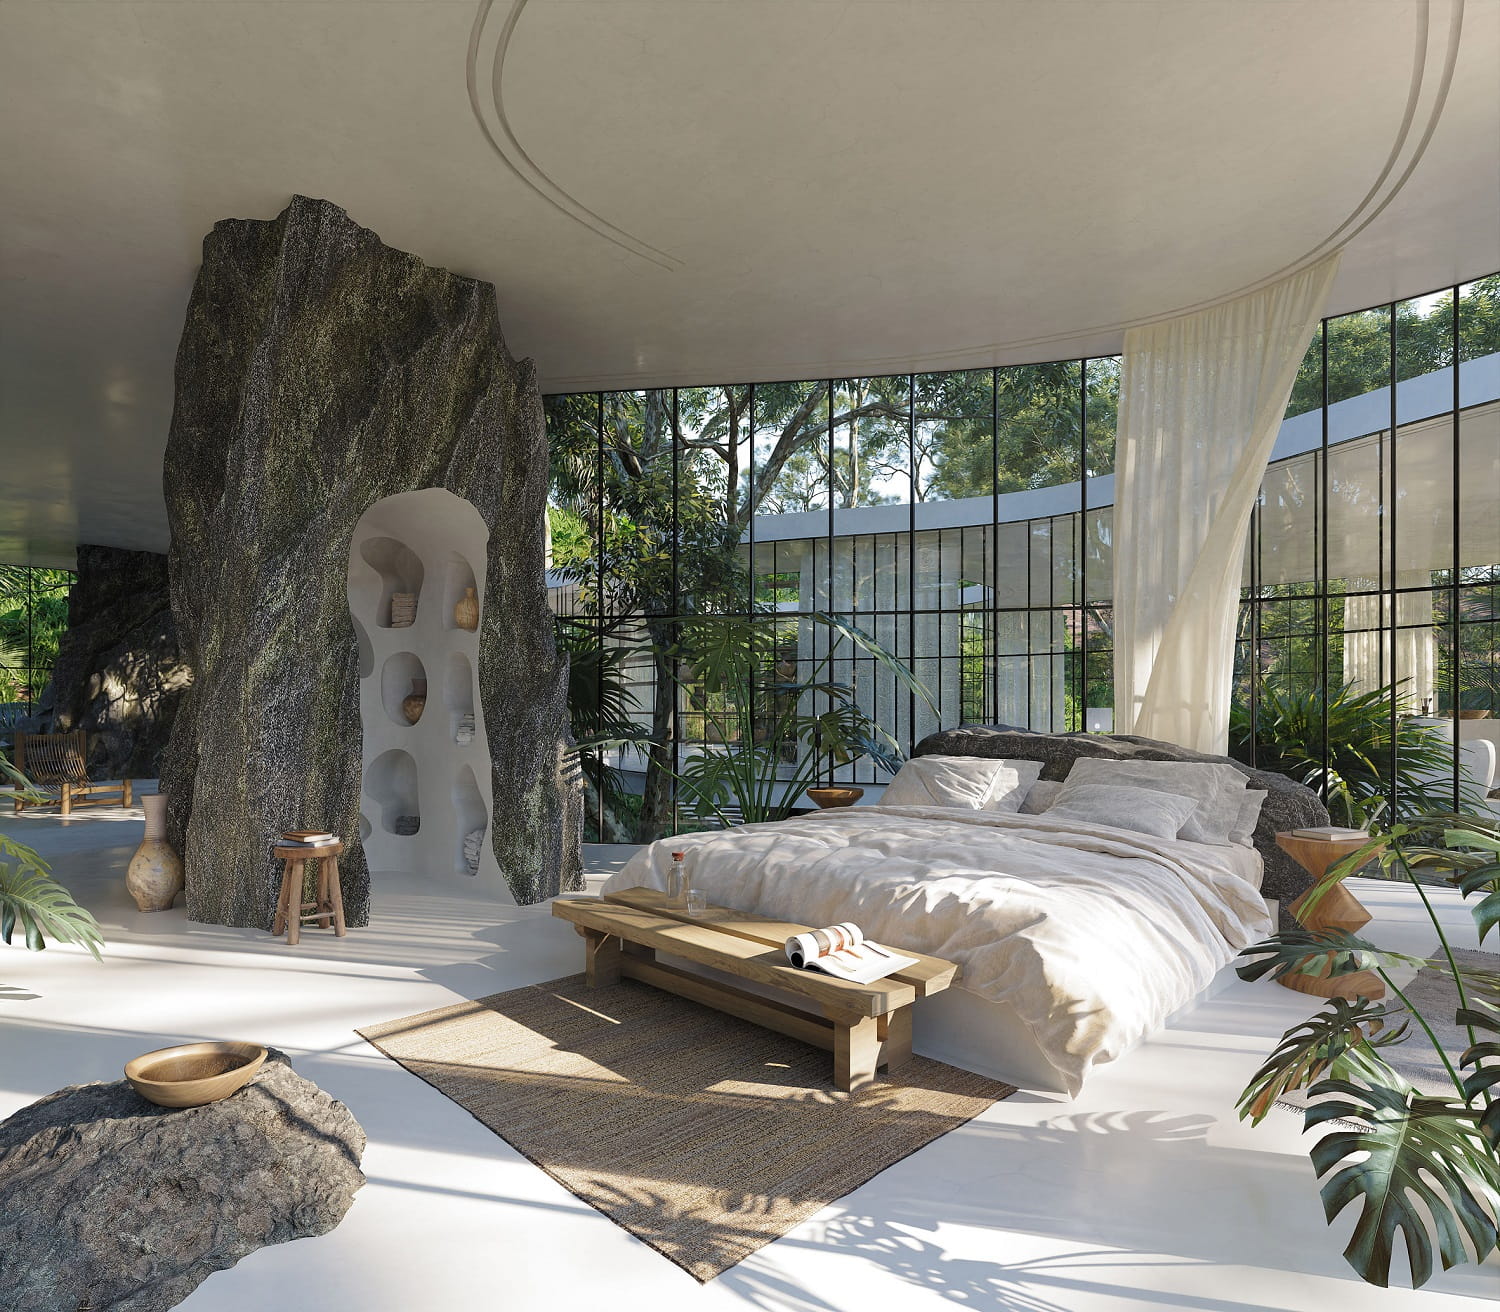 The Imaginary Modernist Home in the Jungles of Brazil